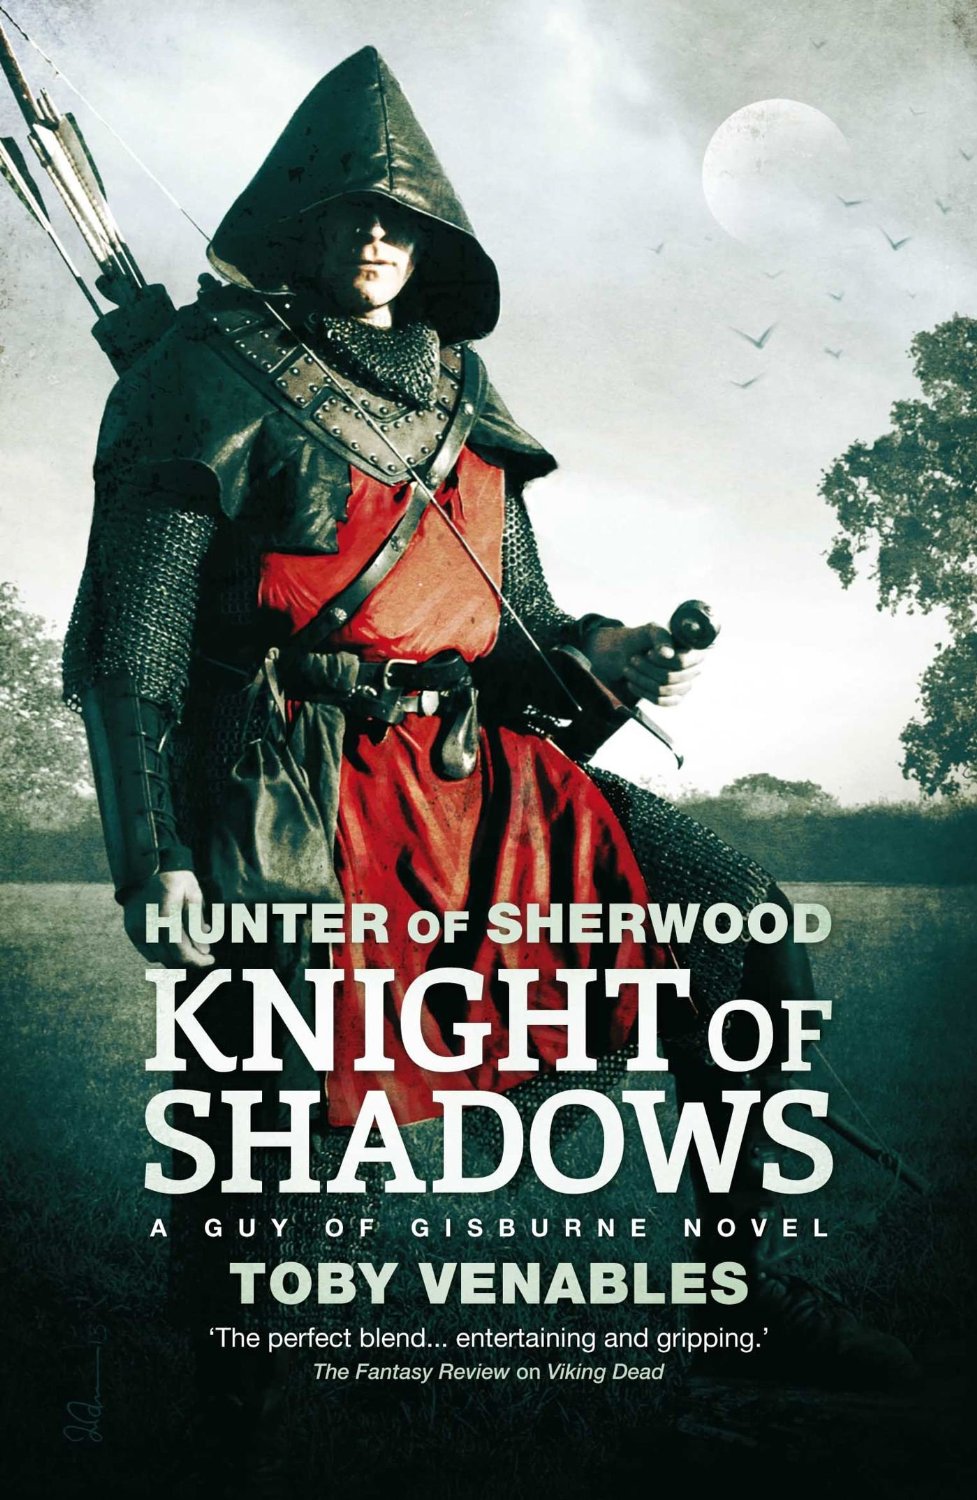 Cover of 'Hunter of Sherwood: Knight of Shadows' showing hooded man gripping hilt of sword